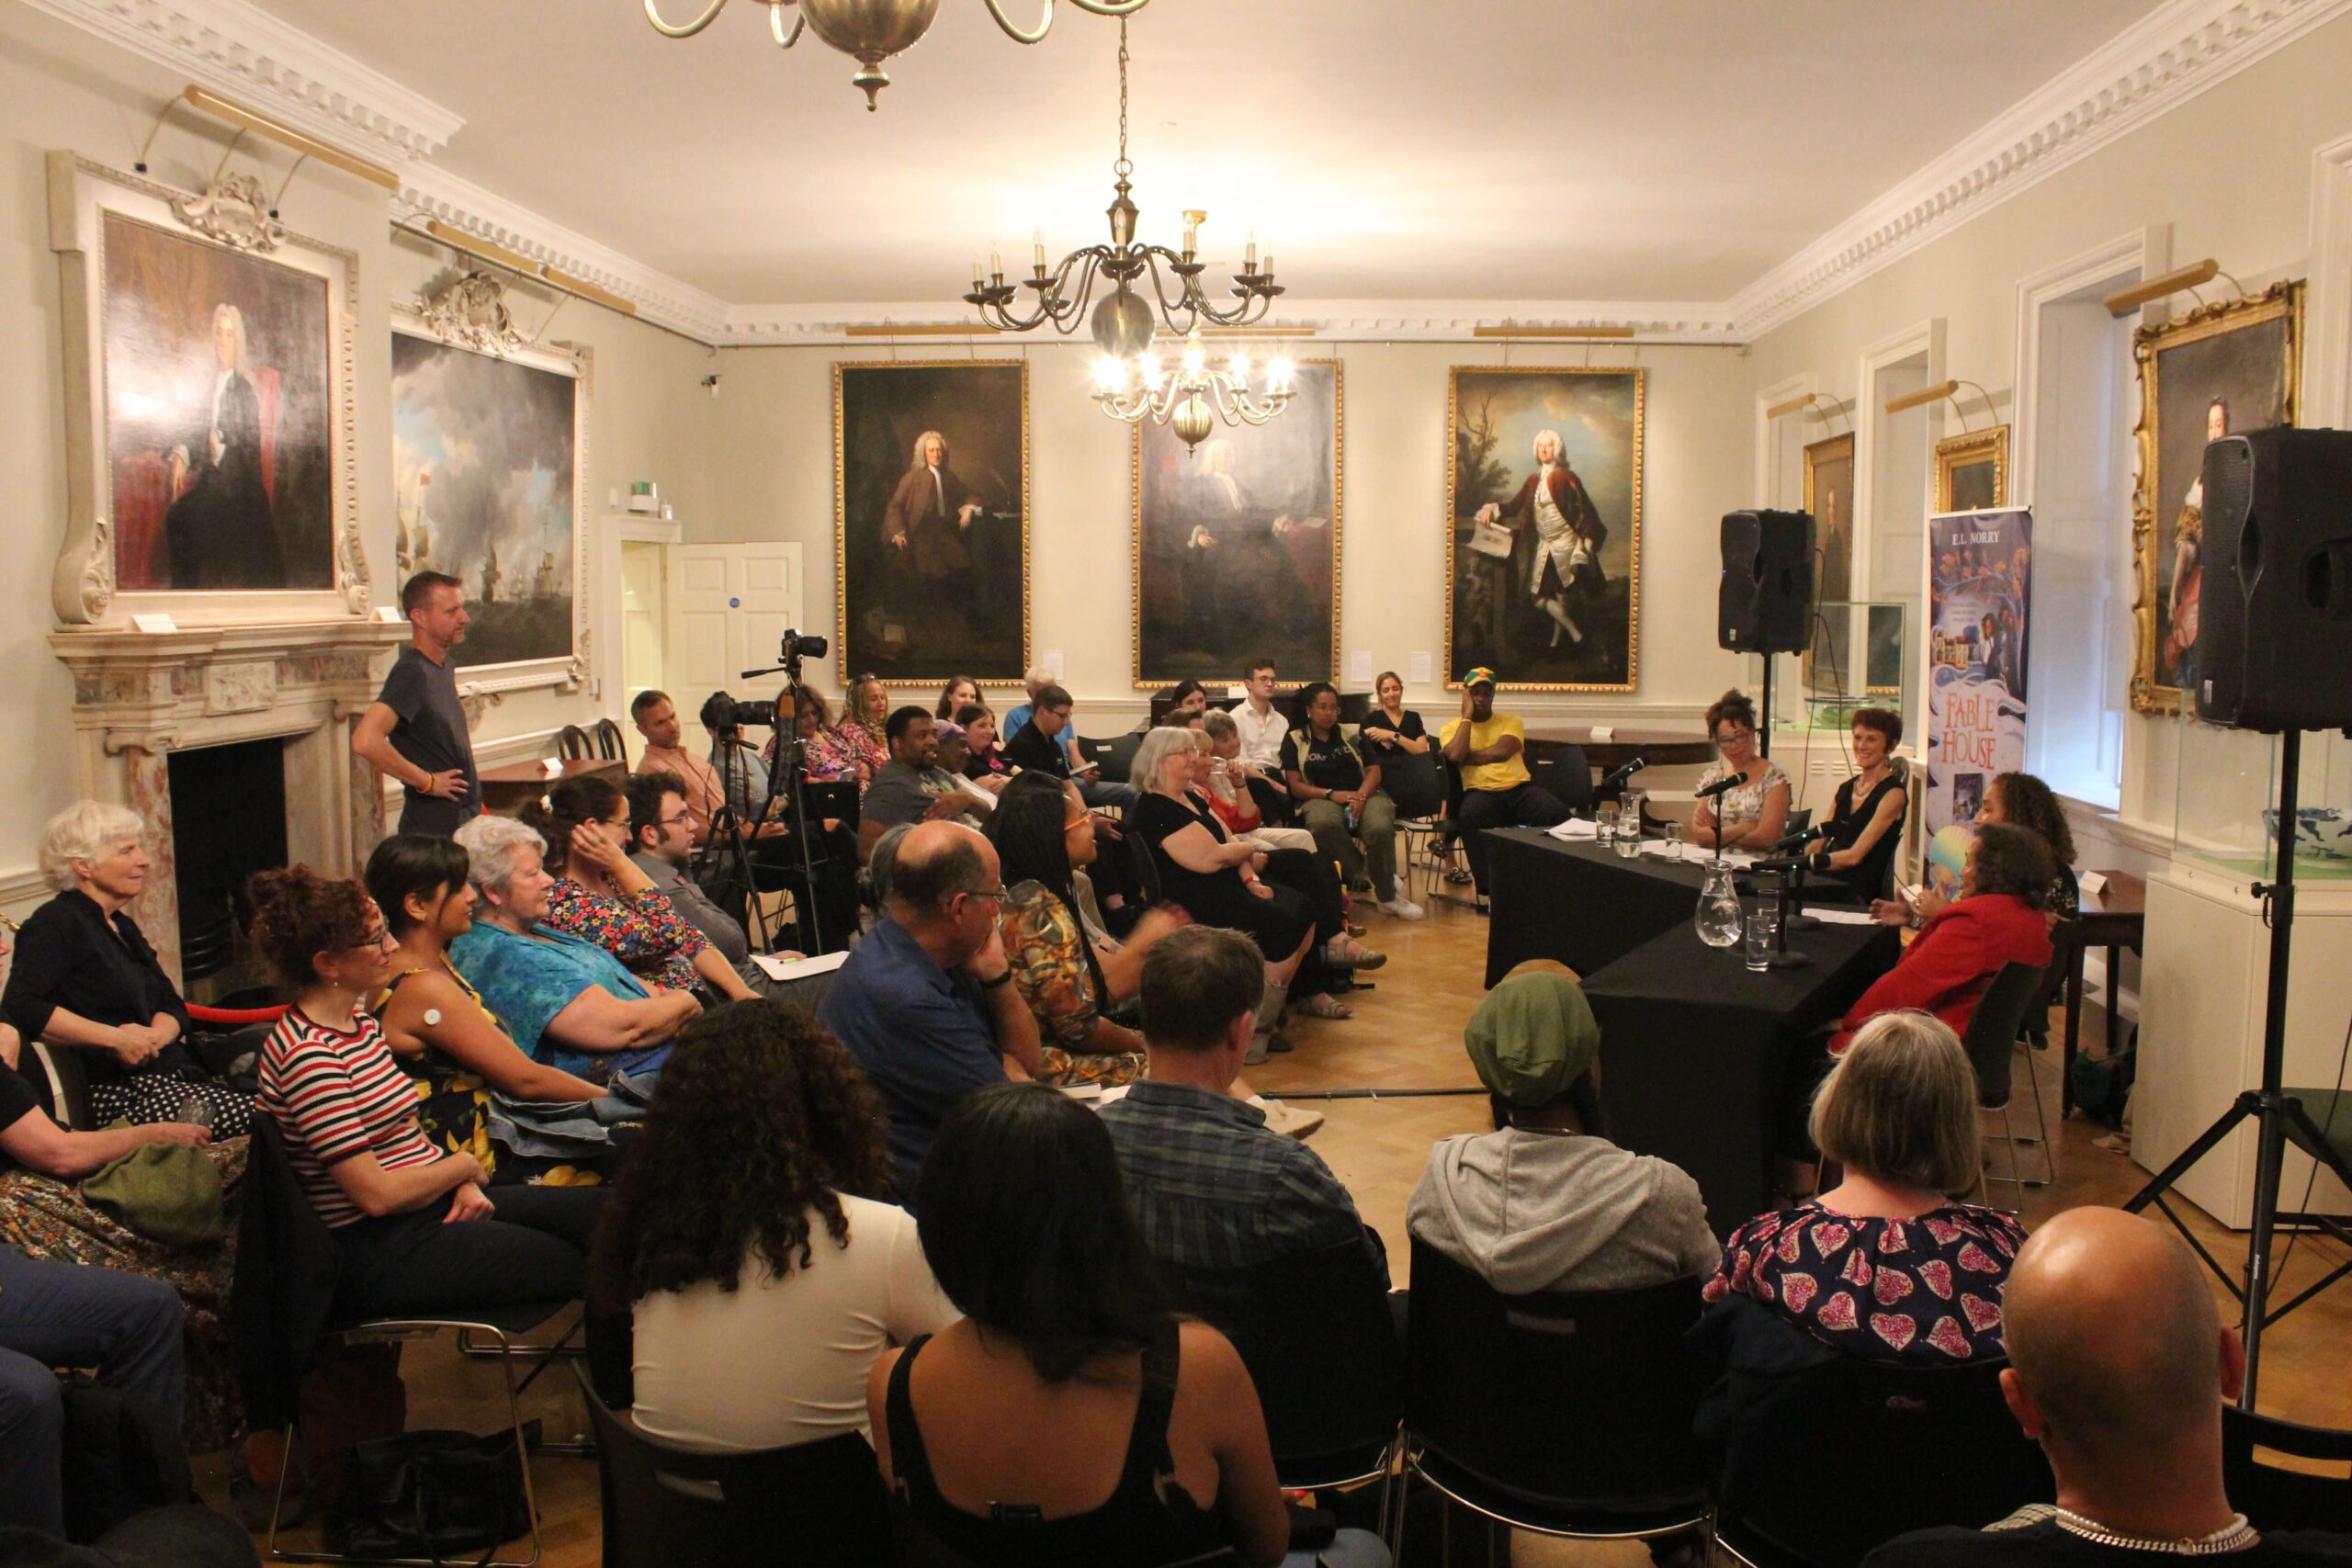 A panel discussion in a packed ornate room